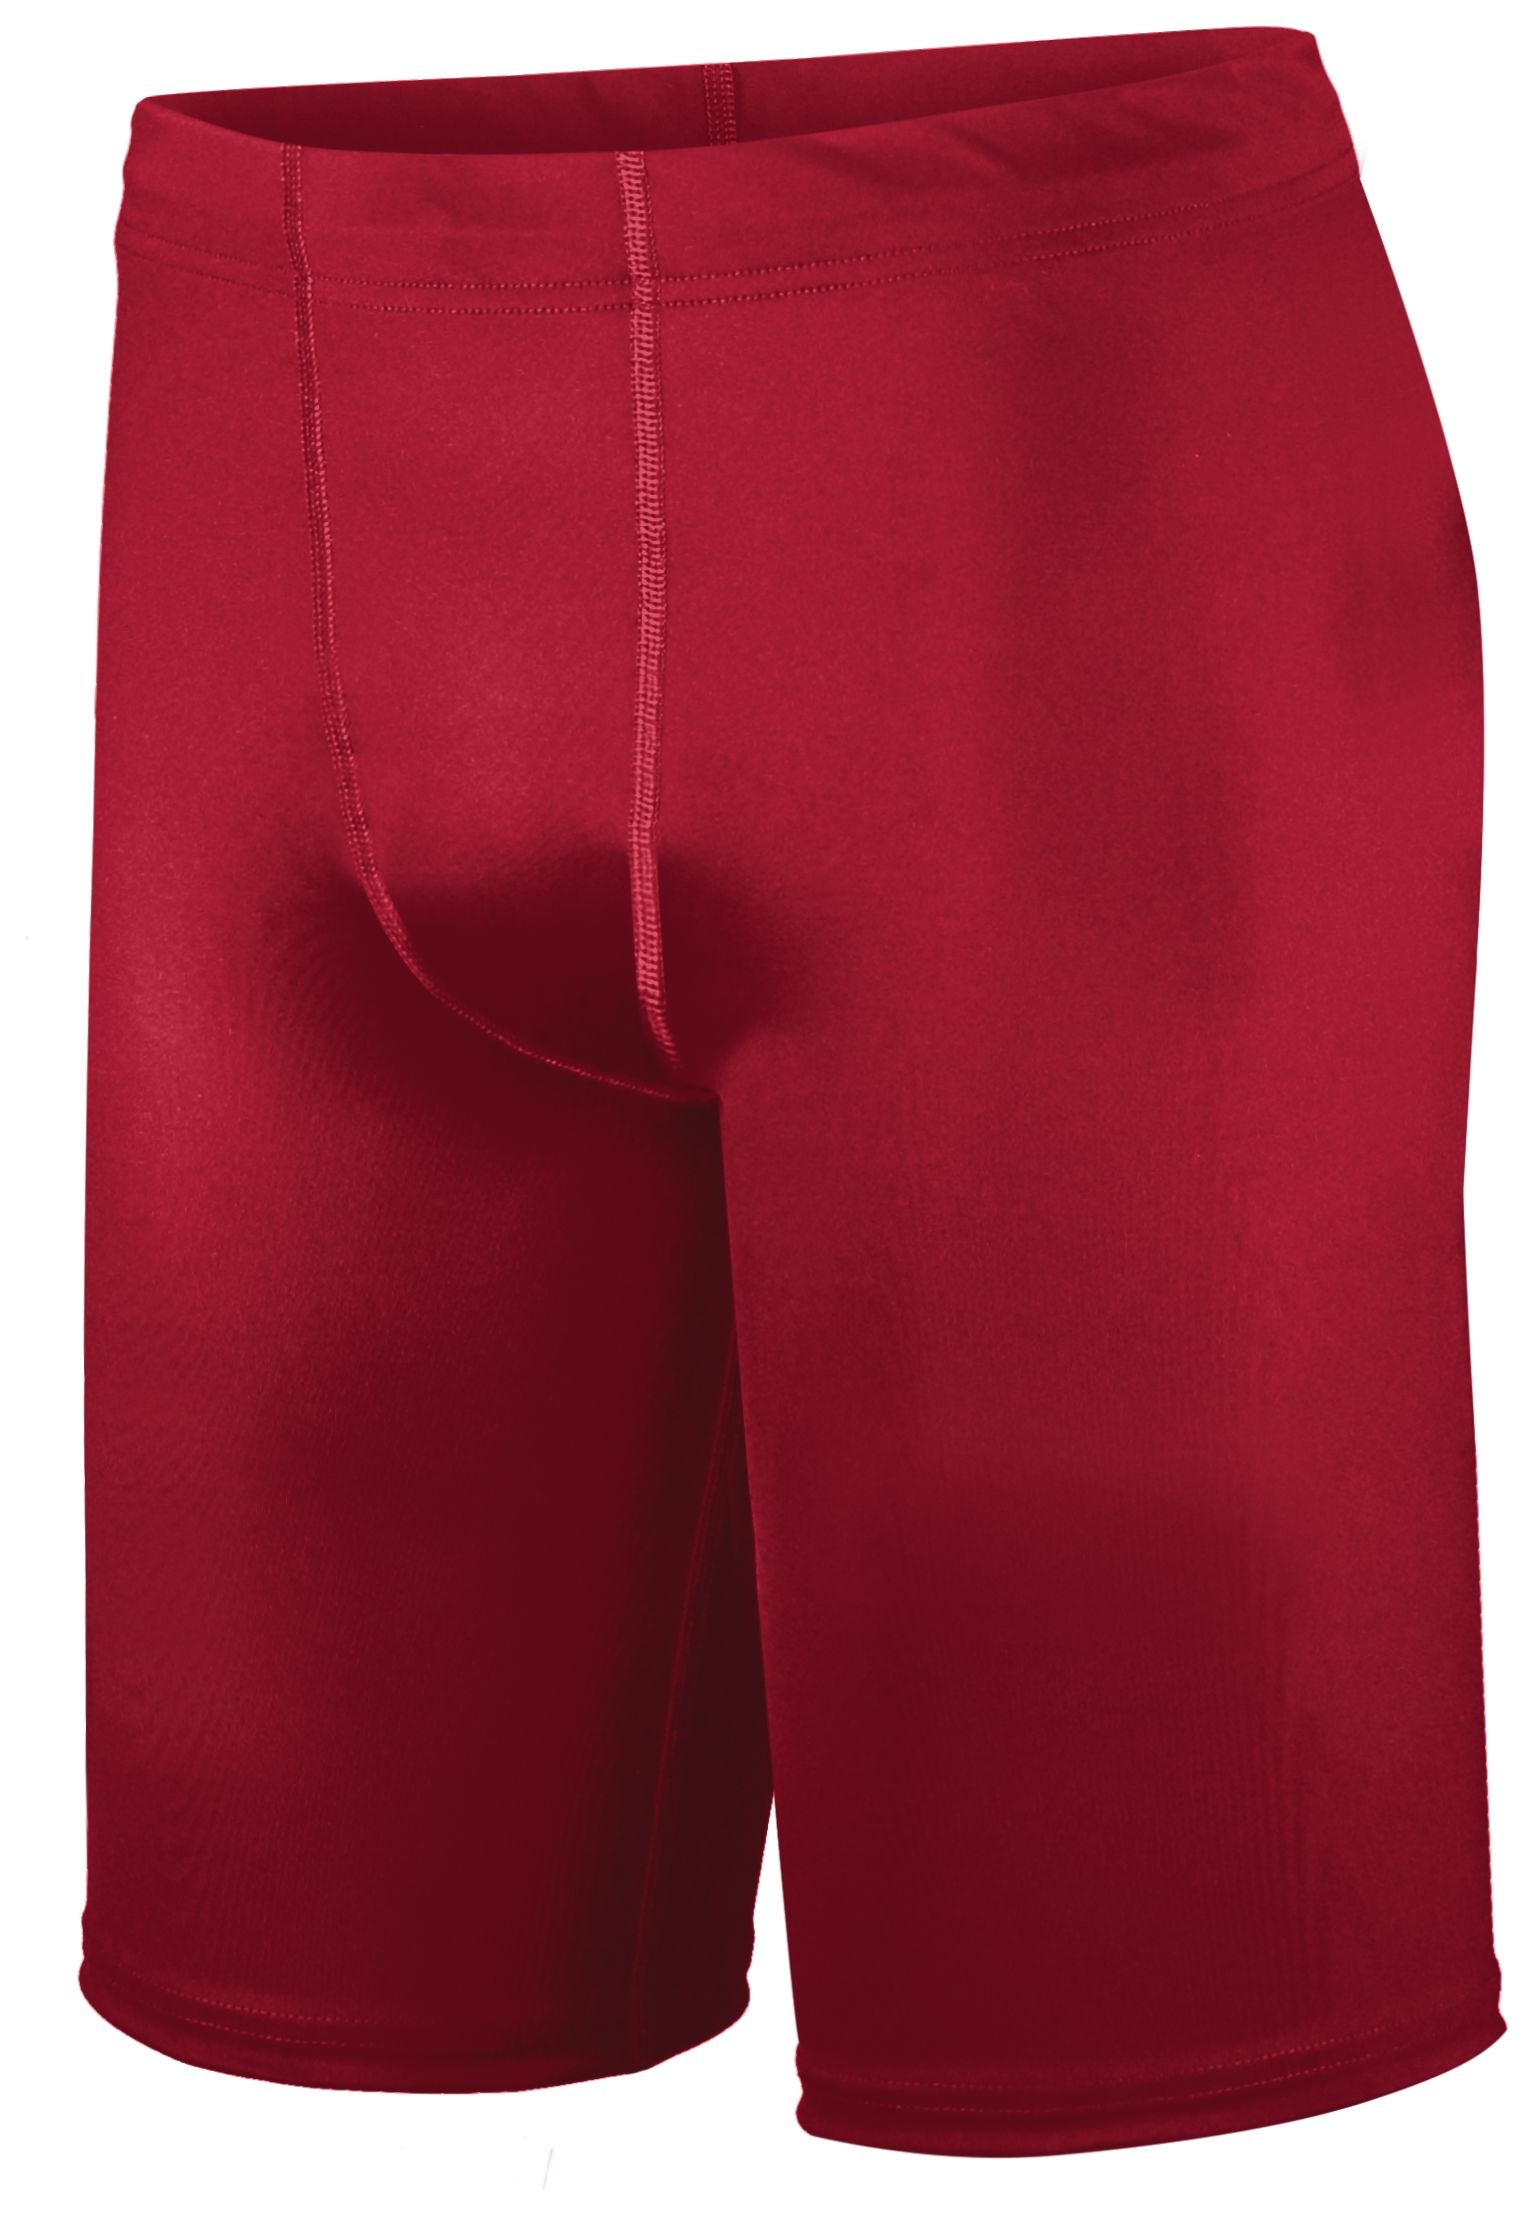 Holloway Pr Max Compression Shorts in Scarlet  -Part of the Adult, Adult-Shorts, Track-Field, Holloway product lines at KanaleyCreations.com